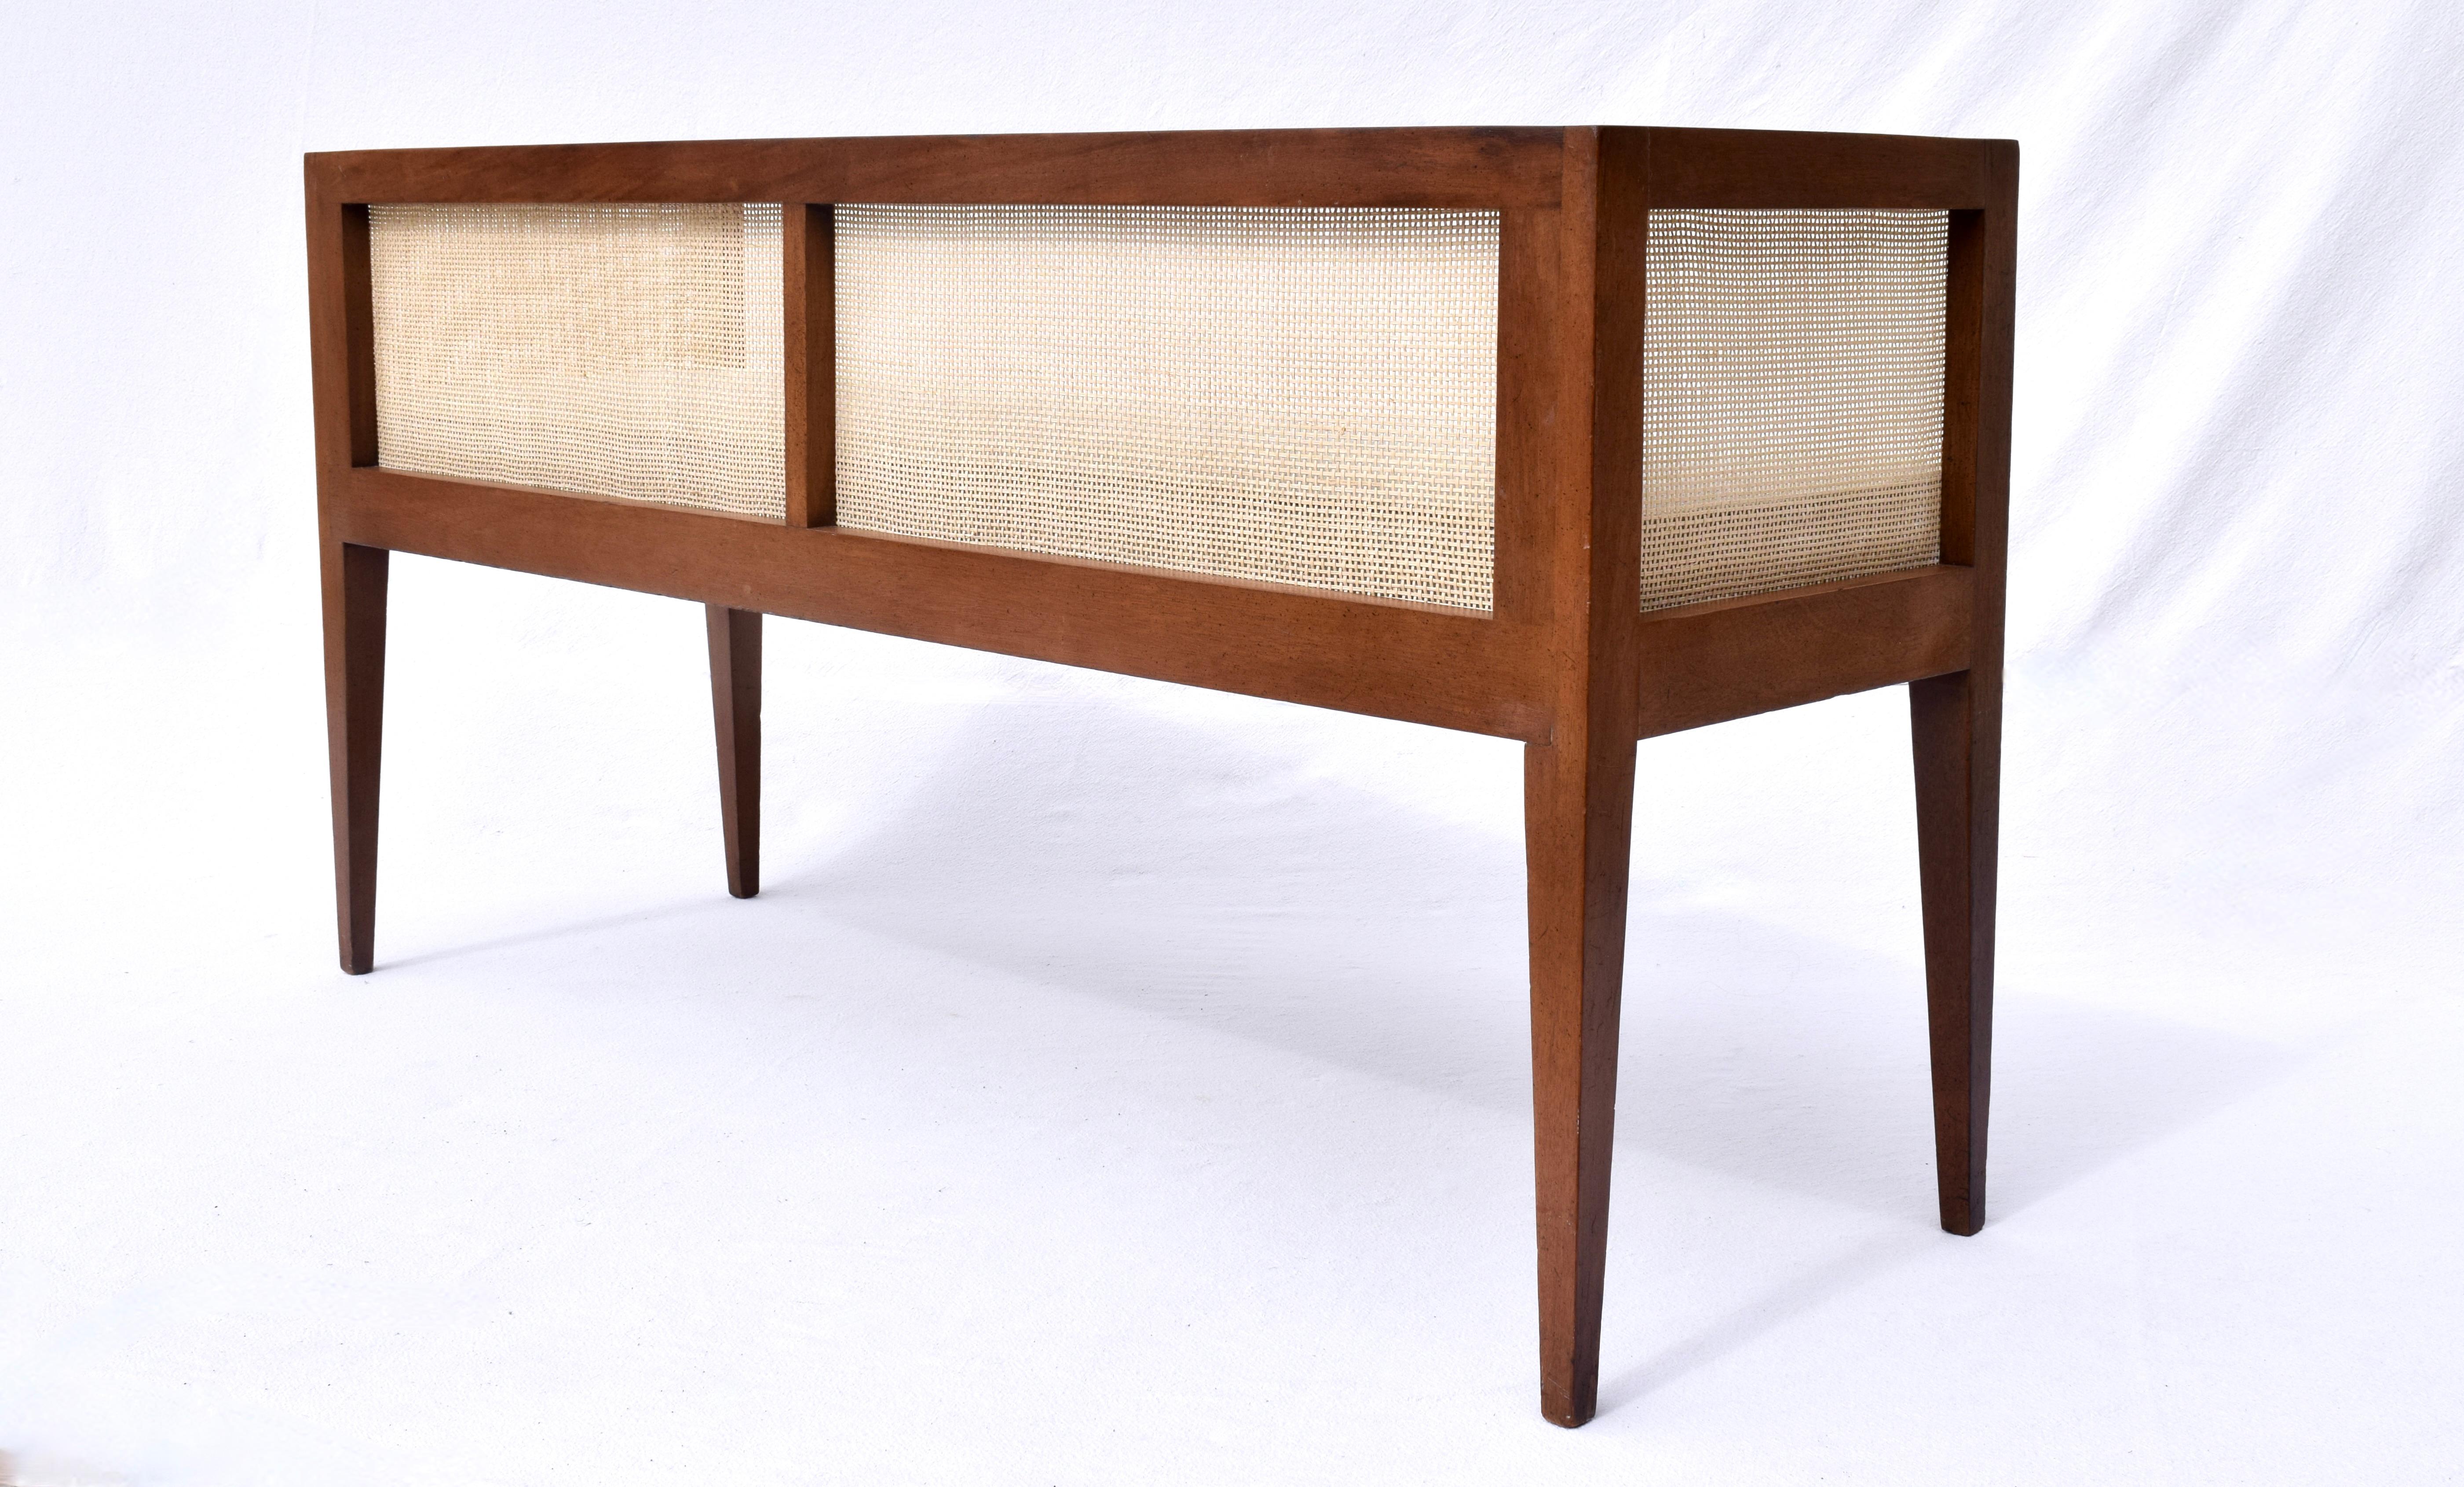 1950s Walnut Window Bench Attributed to Edward Wormley for Dunbar For Sale 4